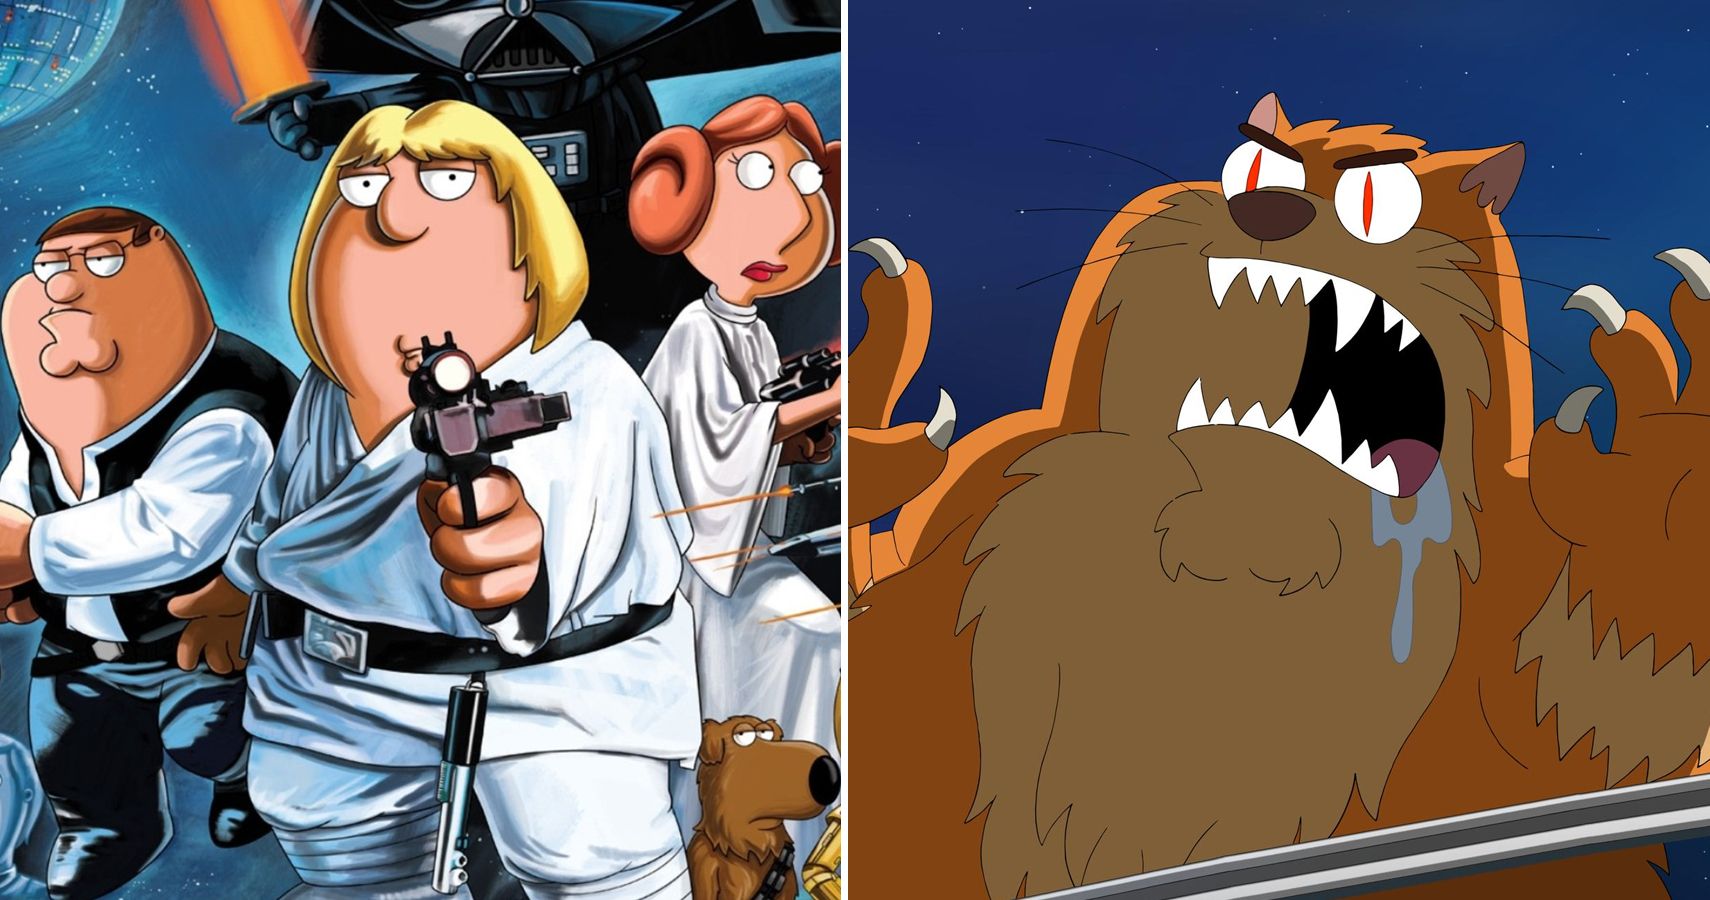 The 10 Funniest Family Guy Spoof Episodes (According to IMDb)